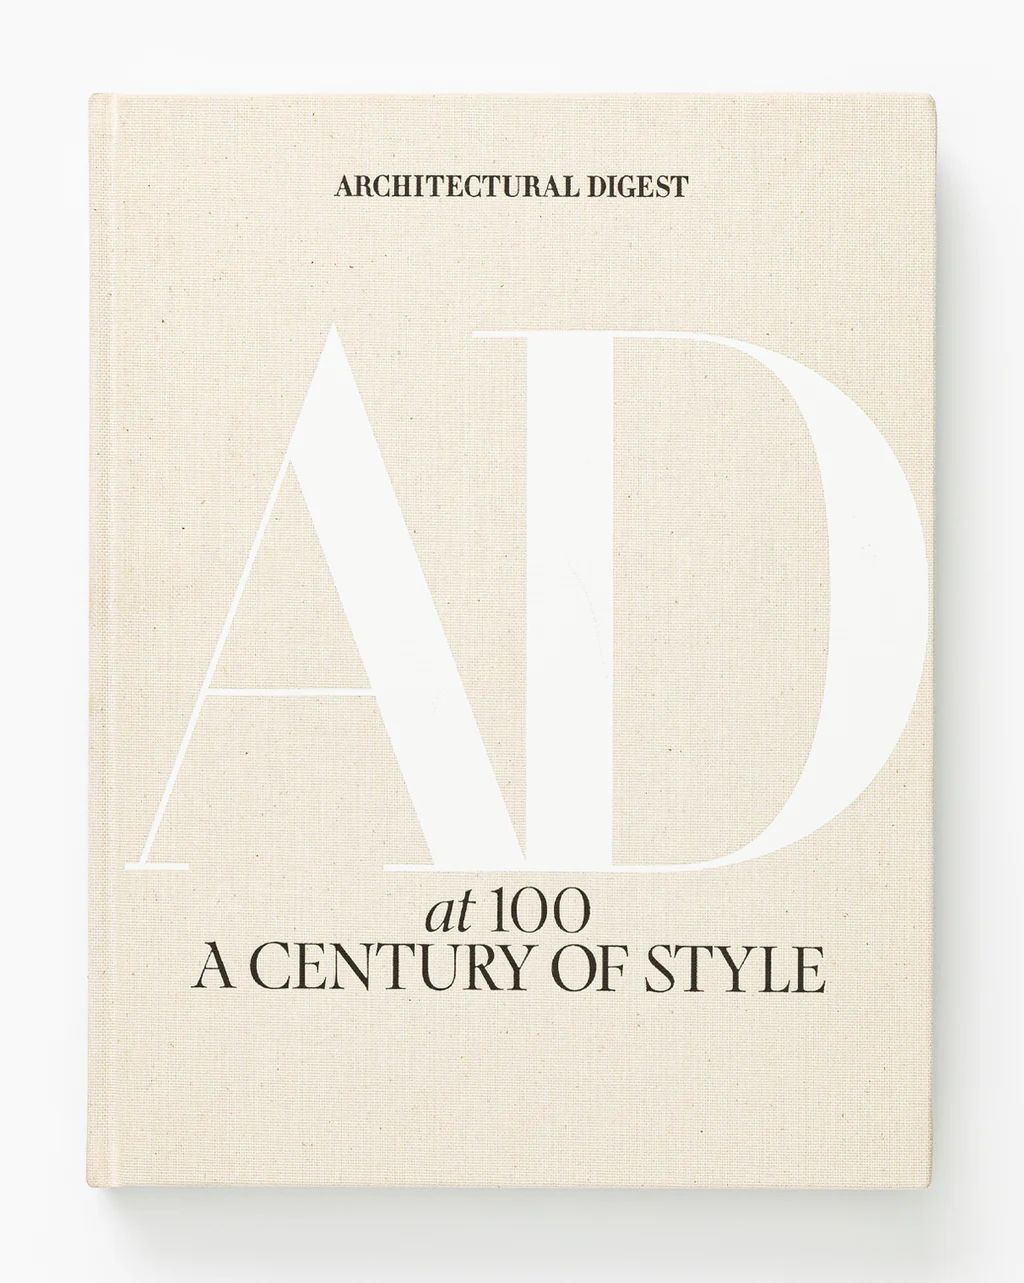 Architectural Digest at 100 | McGee & Co.